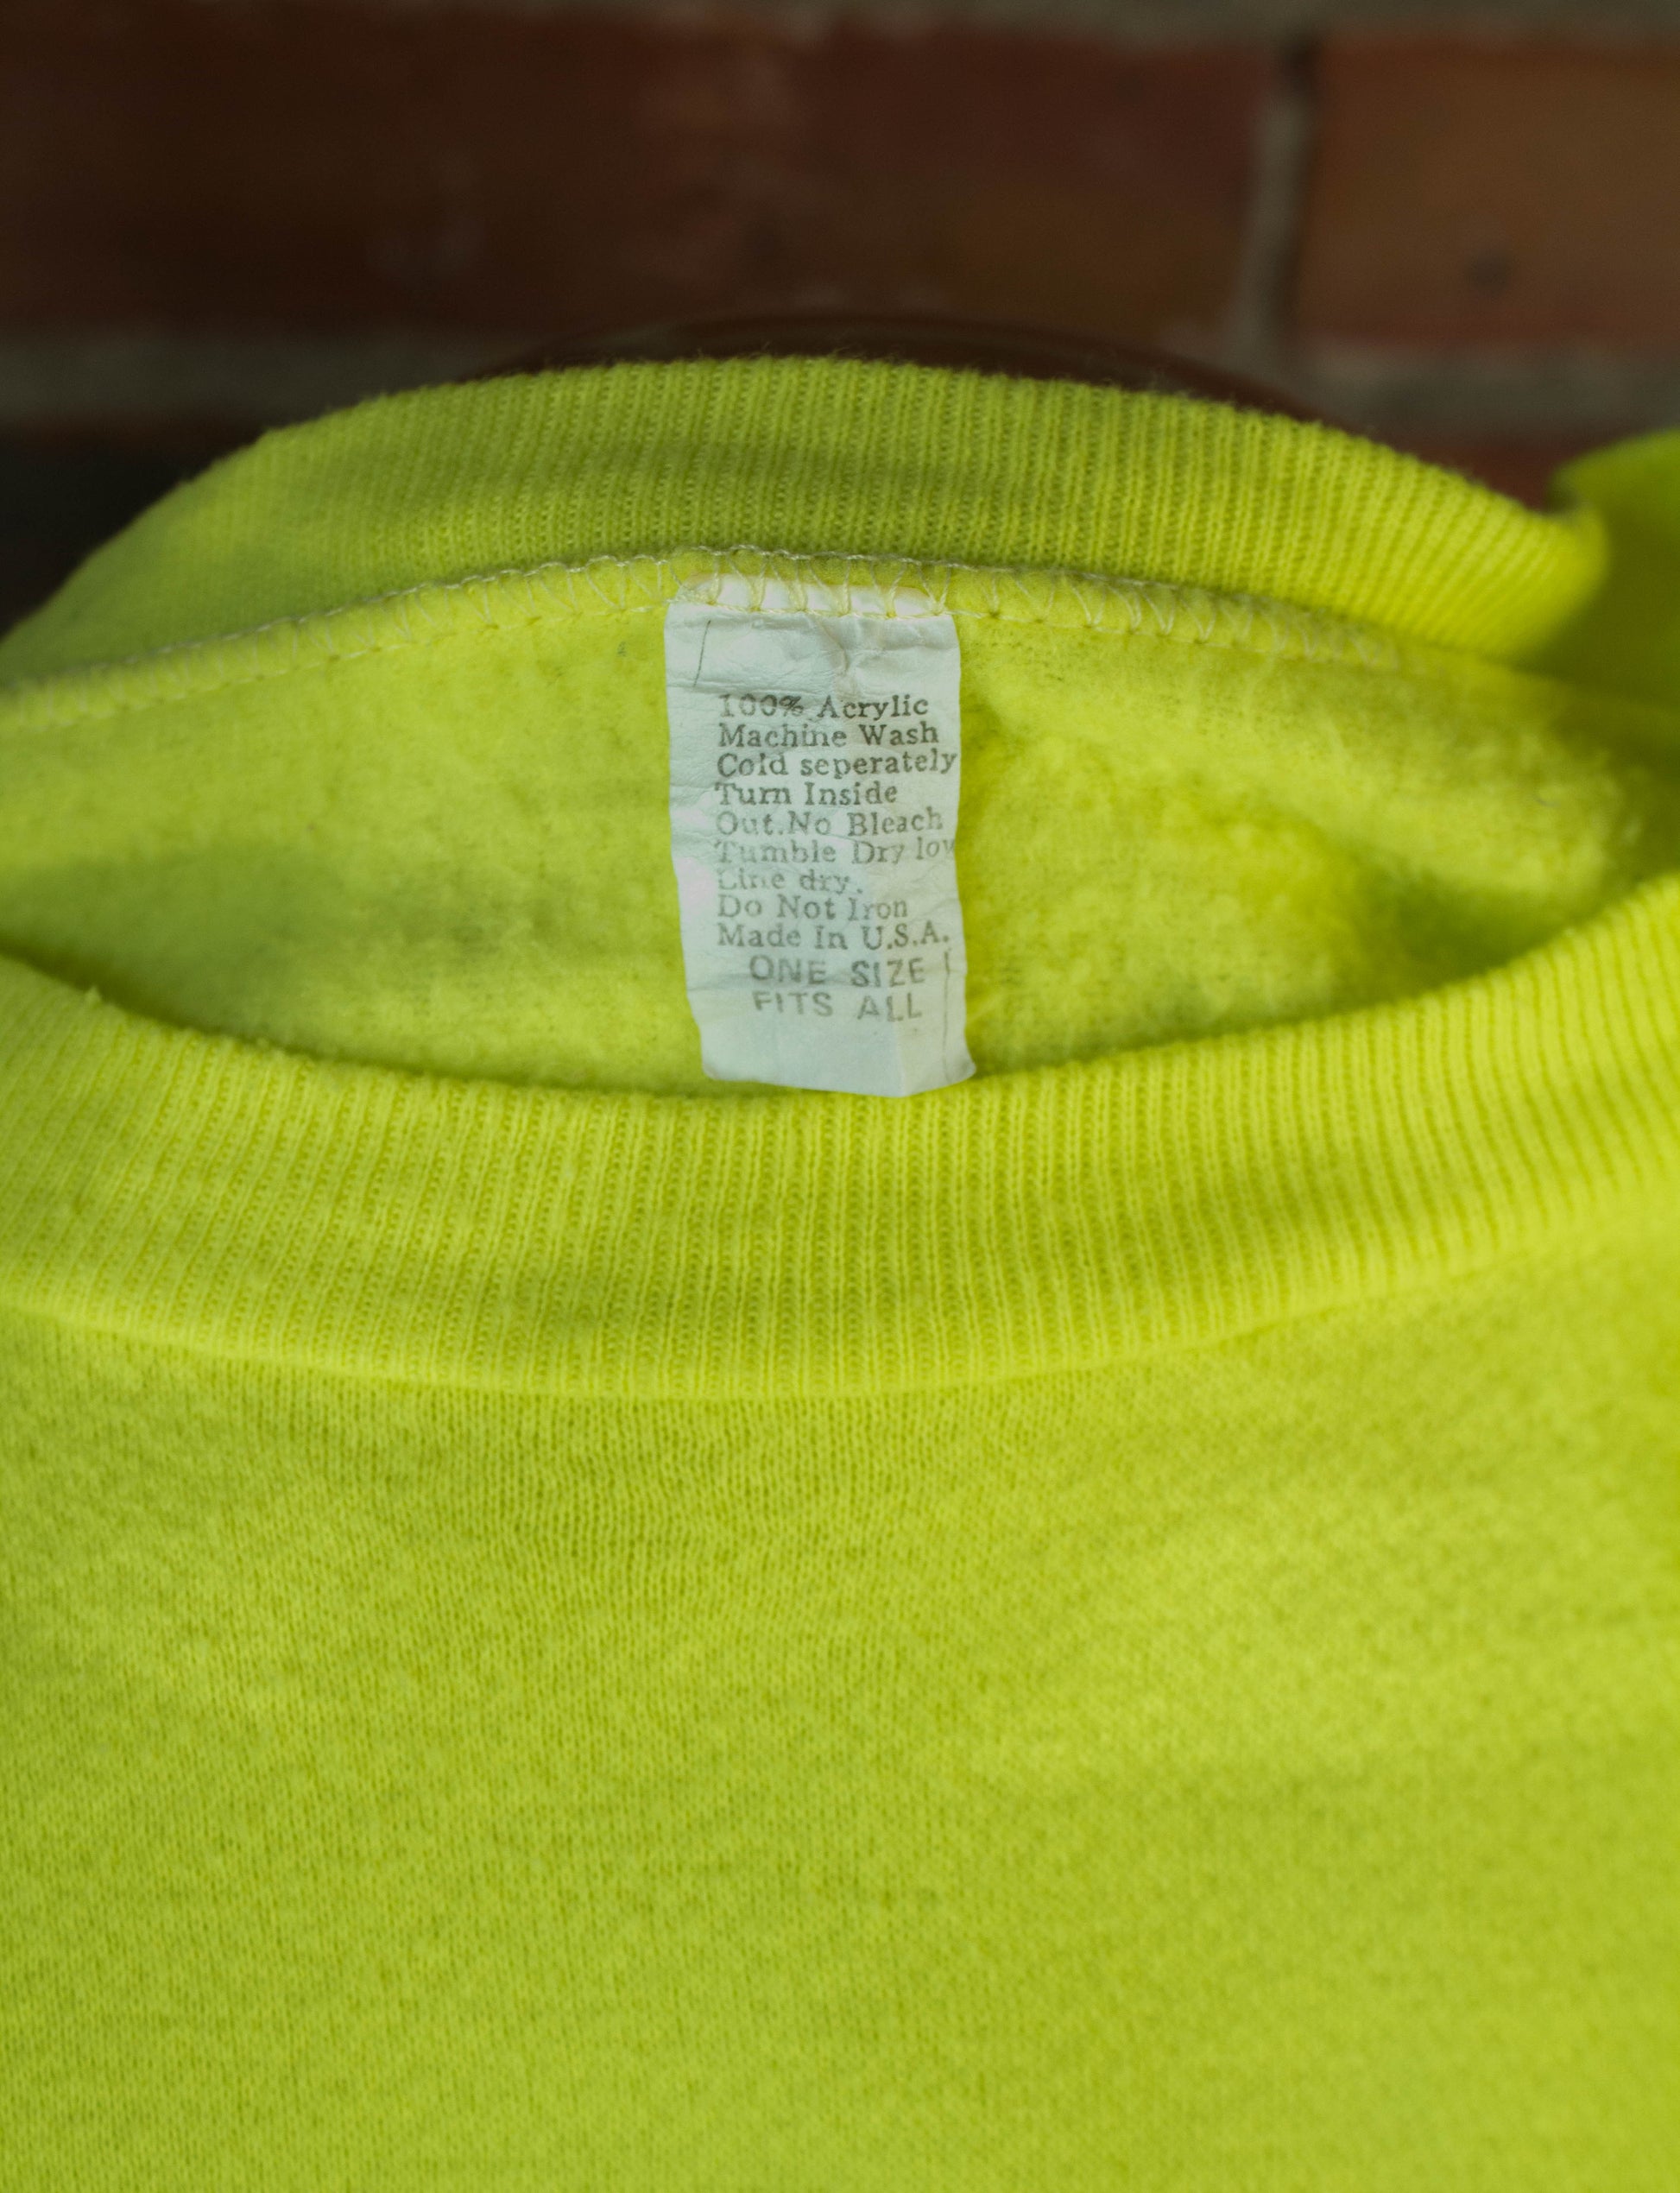 Vintage 80s Guess Neon Yellow Sweatshirt With Neon Green Puffy Print Graphic Unisex  XL